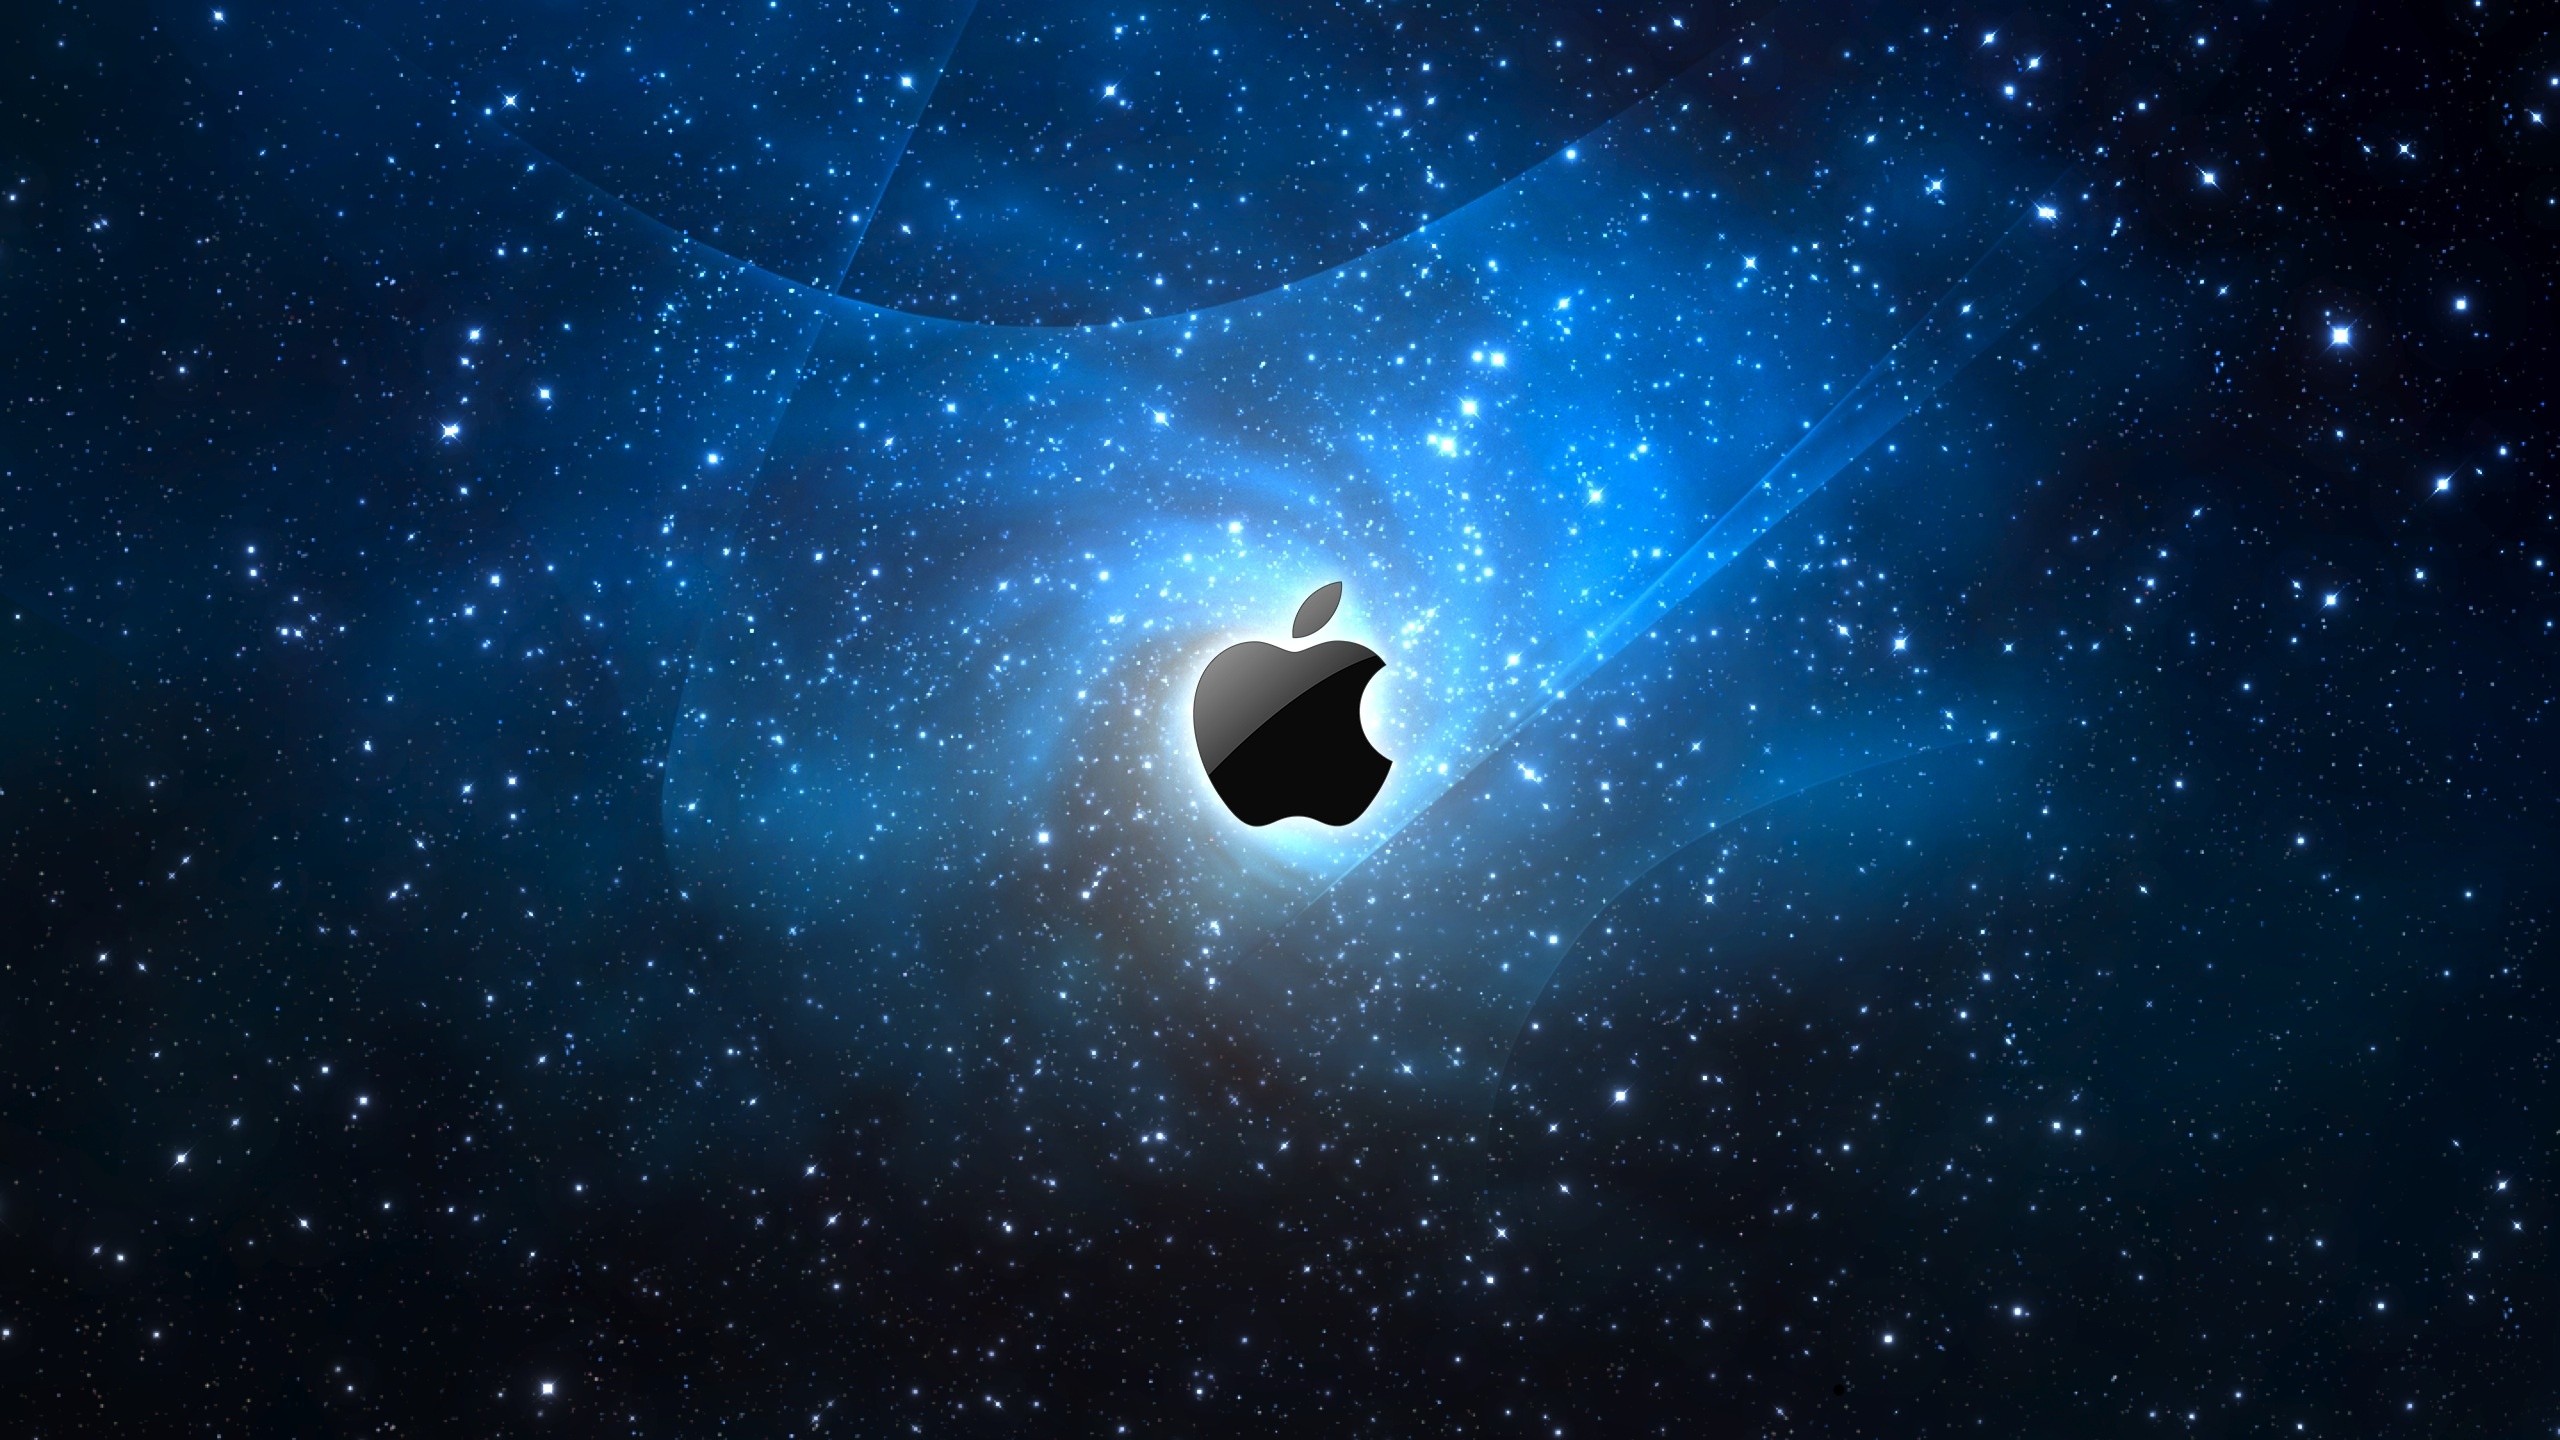 Space Apple logo. How to set wallpaper on your desktop Click the download link from above and set the wallpaper on the desktop from your OS